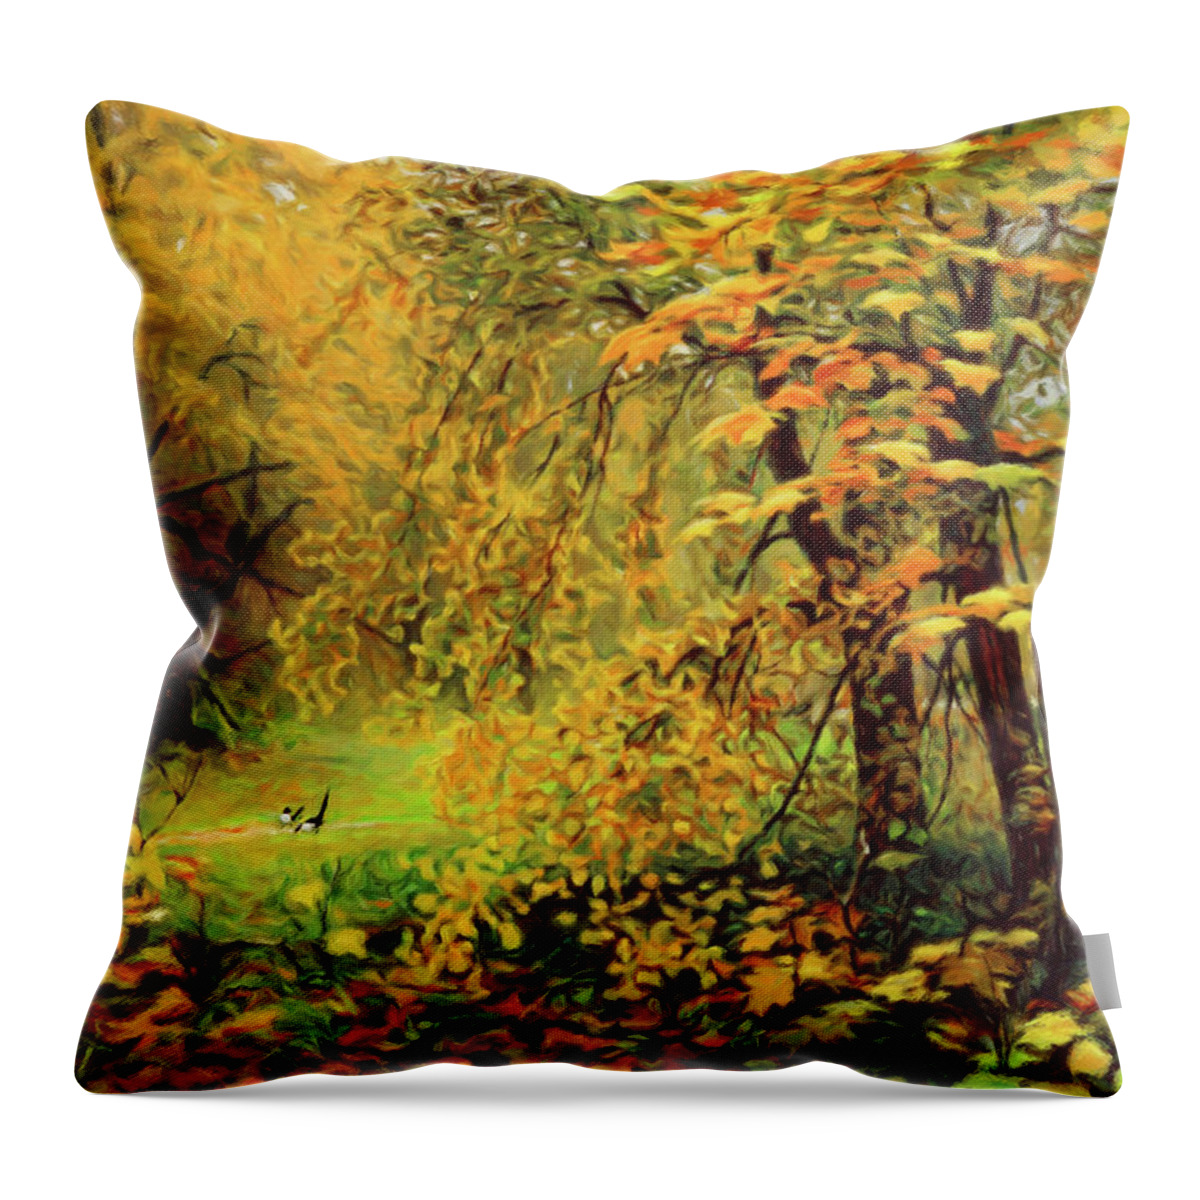 Autumn Bliss Of Color Throw Pillow featuring the mixed media Autumn Bliss Of Color by Georgiana Romanovna